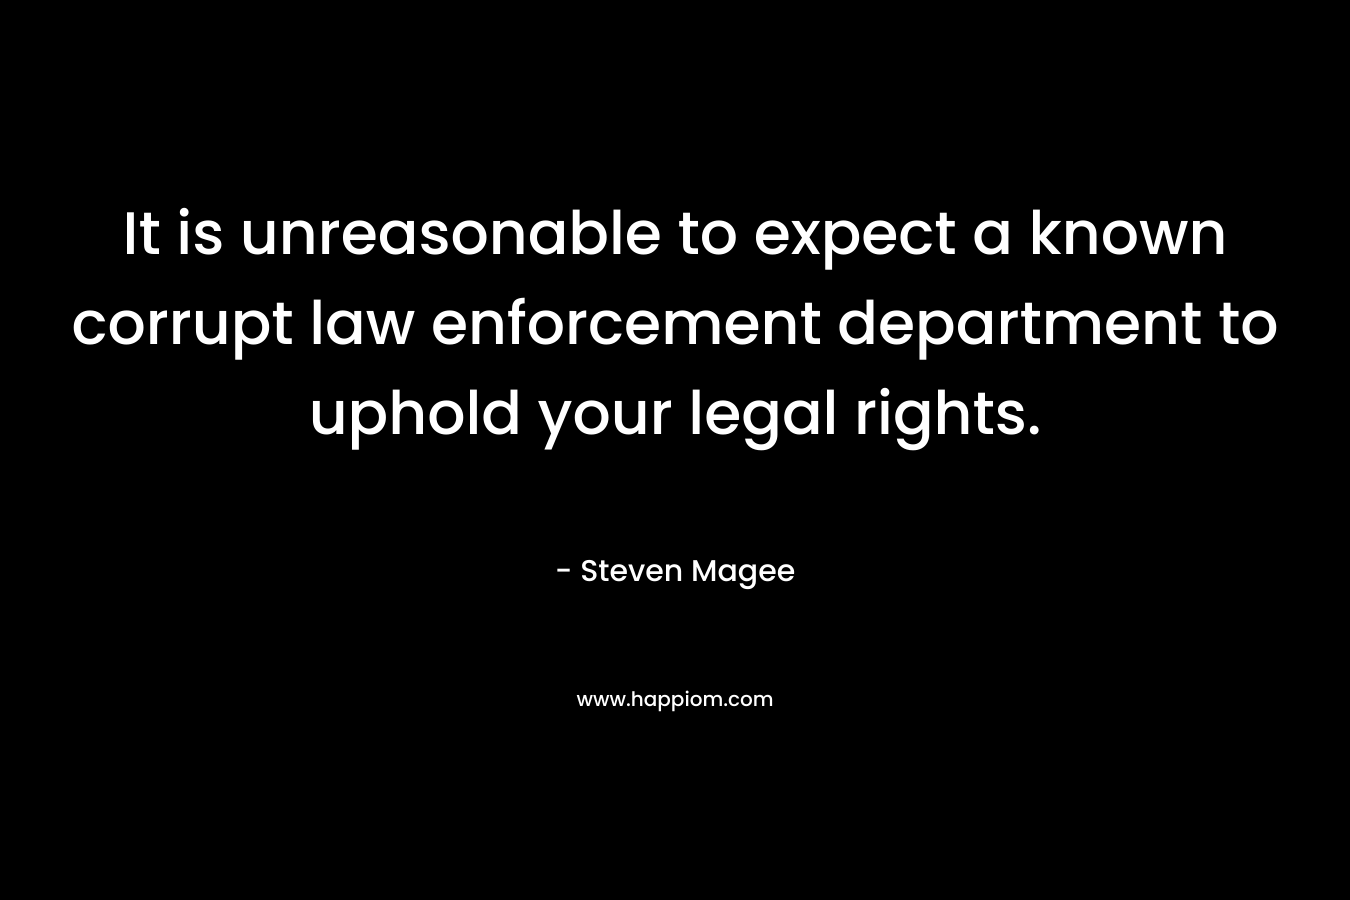 It is unreasonable to expect a known corrupt law enforcement department to uphold your legal rights.